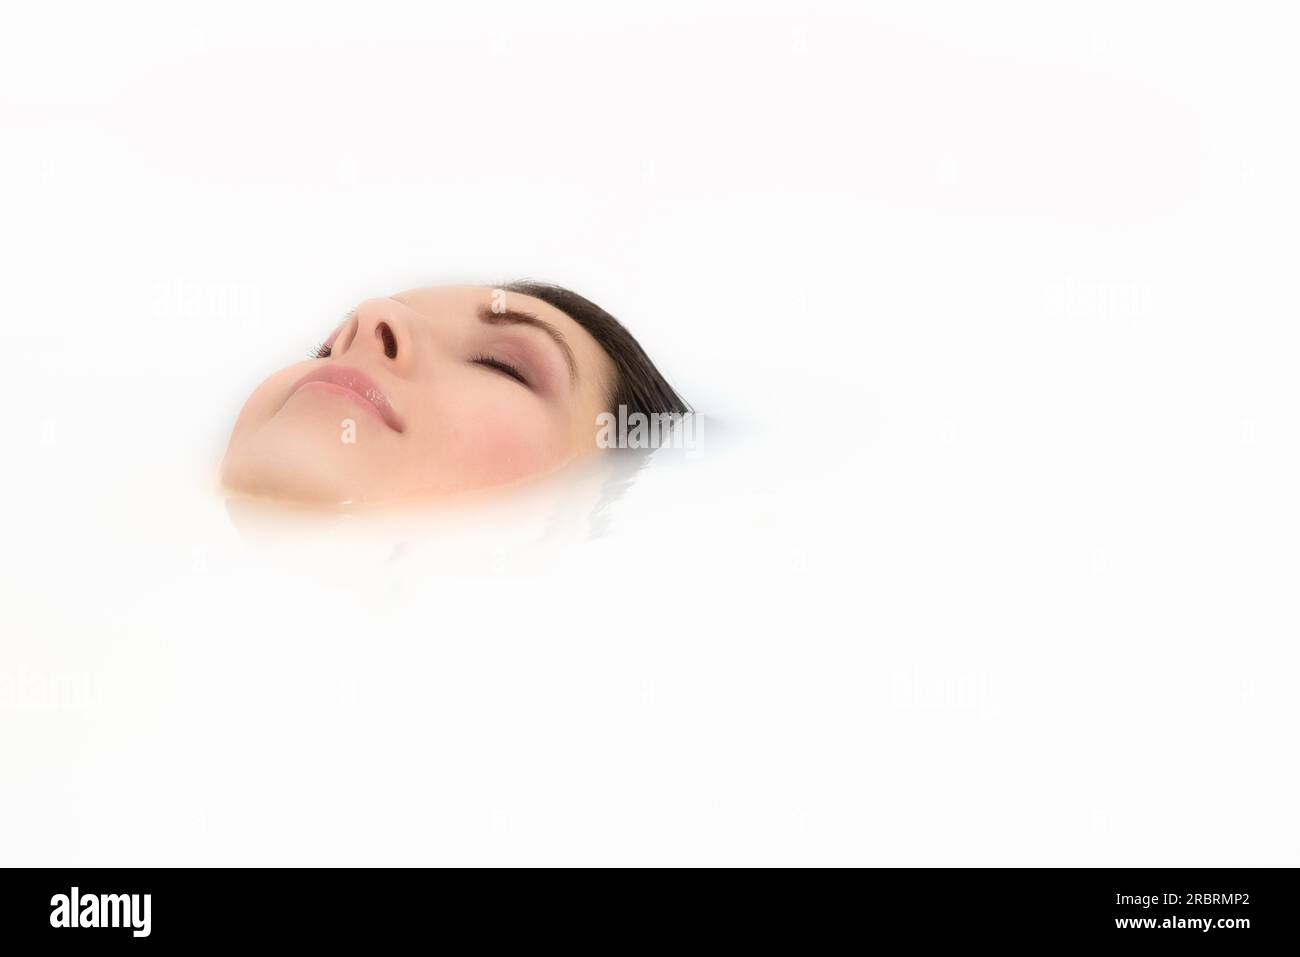 Blissful beautiful young woman pampering herself soaking in a hot bath with just her face visible above the soapy water as she relaxes with a serene Stock Photo